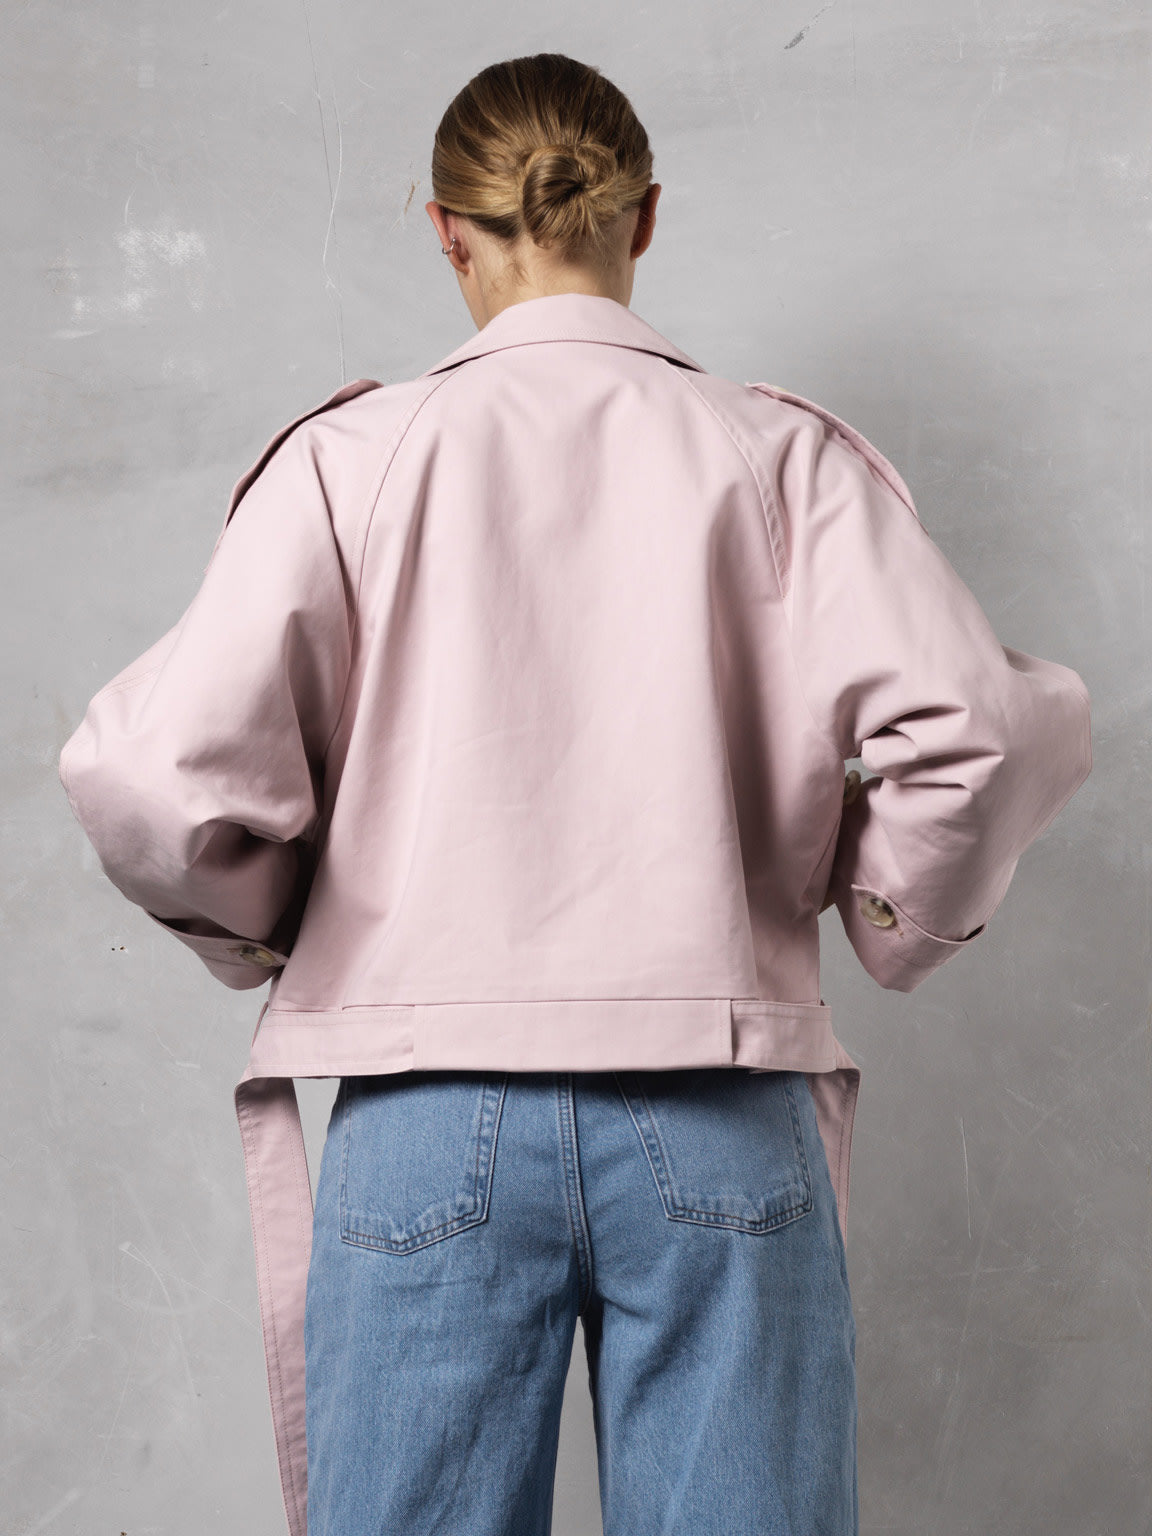 BOBBY CANVAS TRENCHJACKET - LIGHT PINK